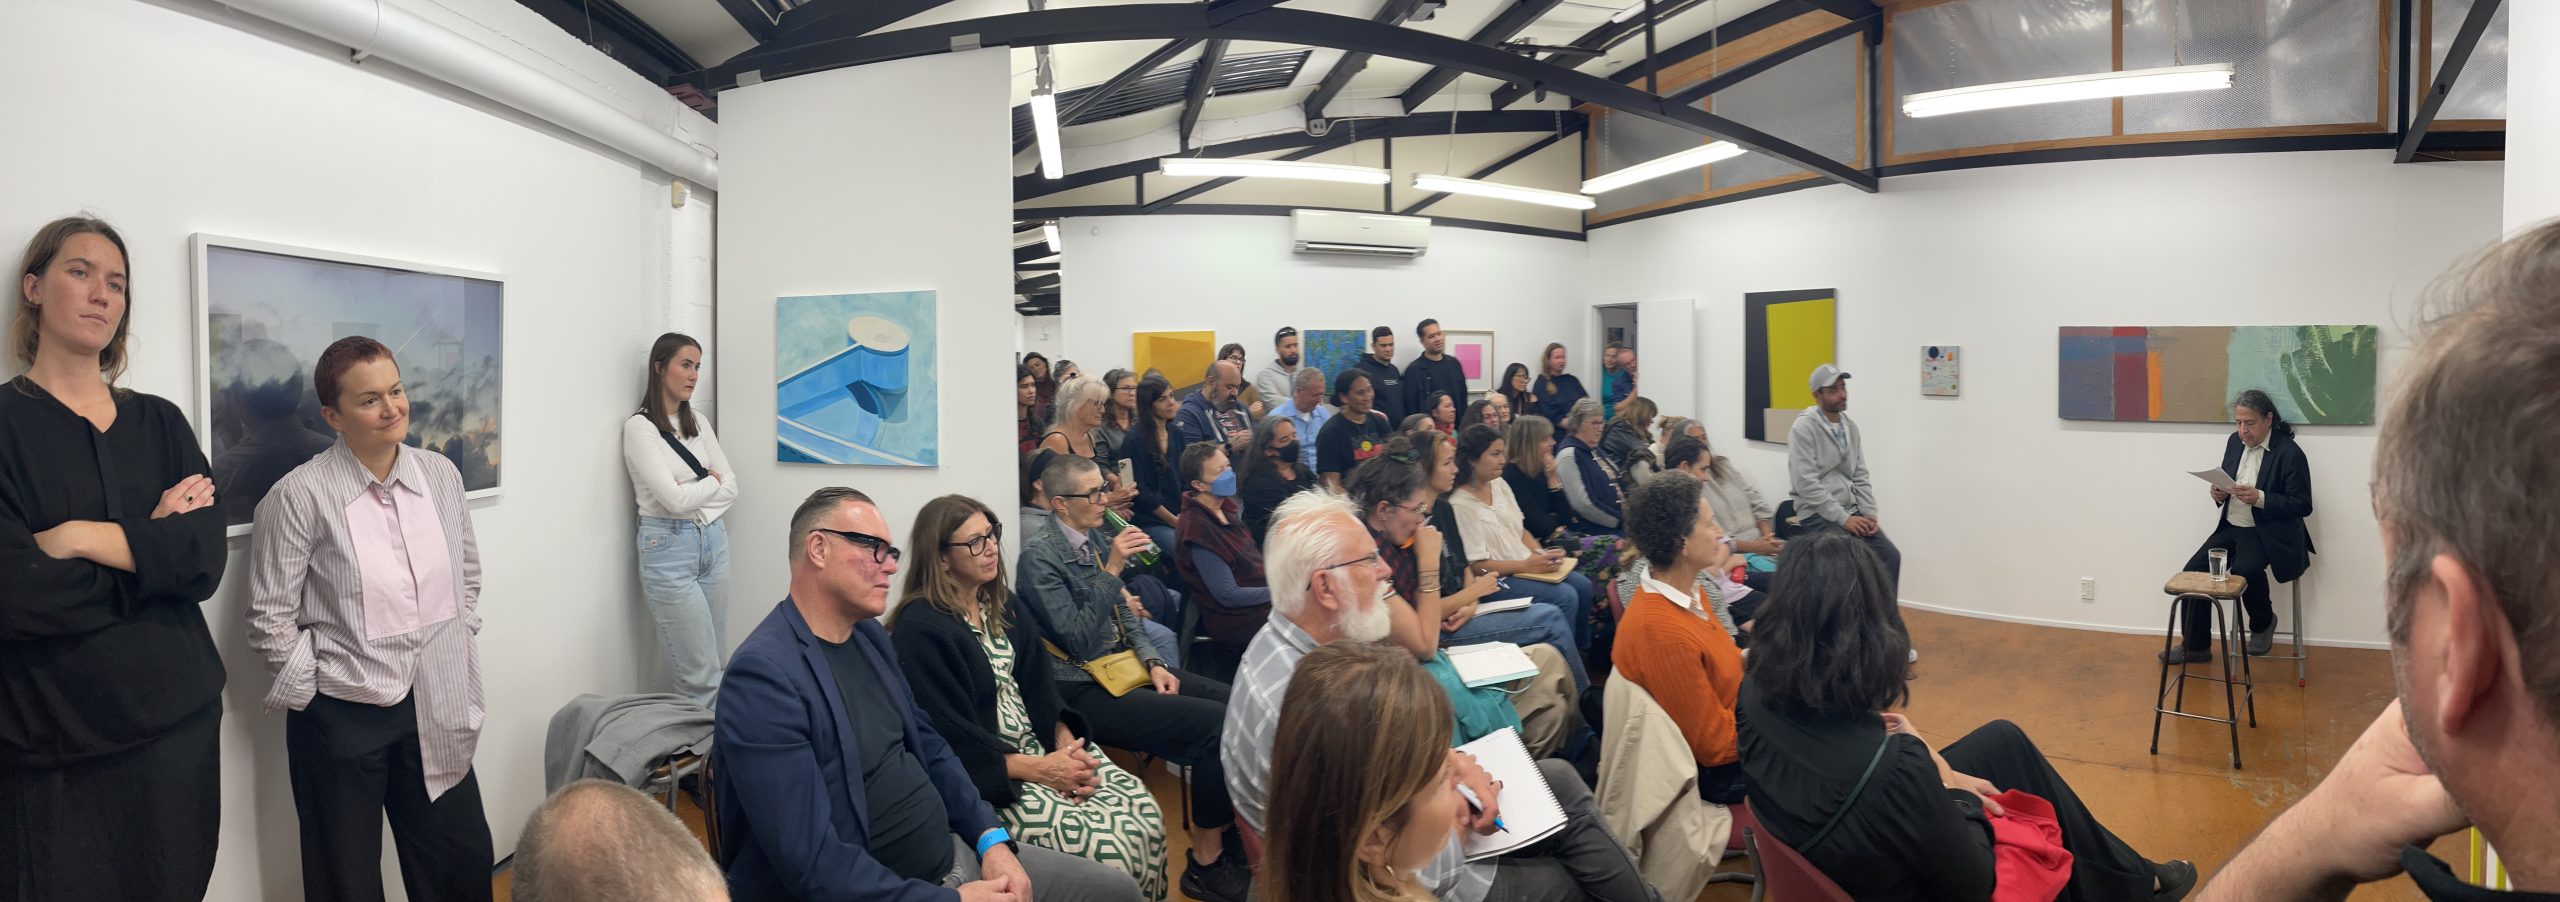 Smith speaks to a large assembled group in a gallery about his experiences as an activist, critic, and curator making sense of the contemporary landscape of Indigenous art in the United States and the way it echoes and differs from the work of artists in Aotearoa, or New Zealand.